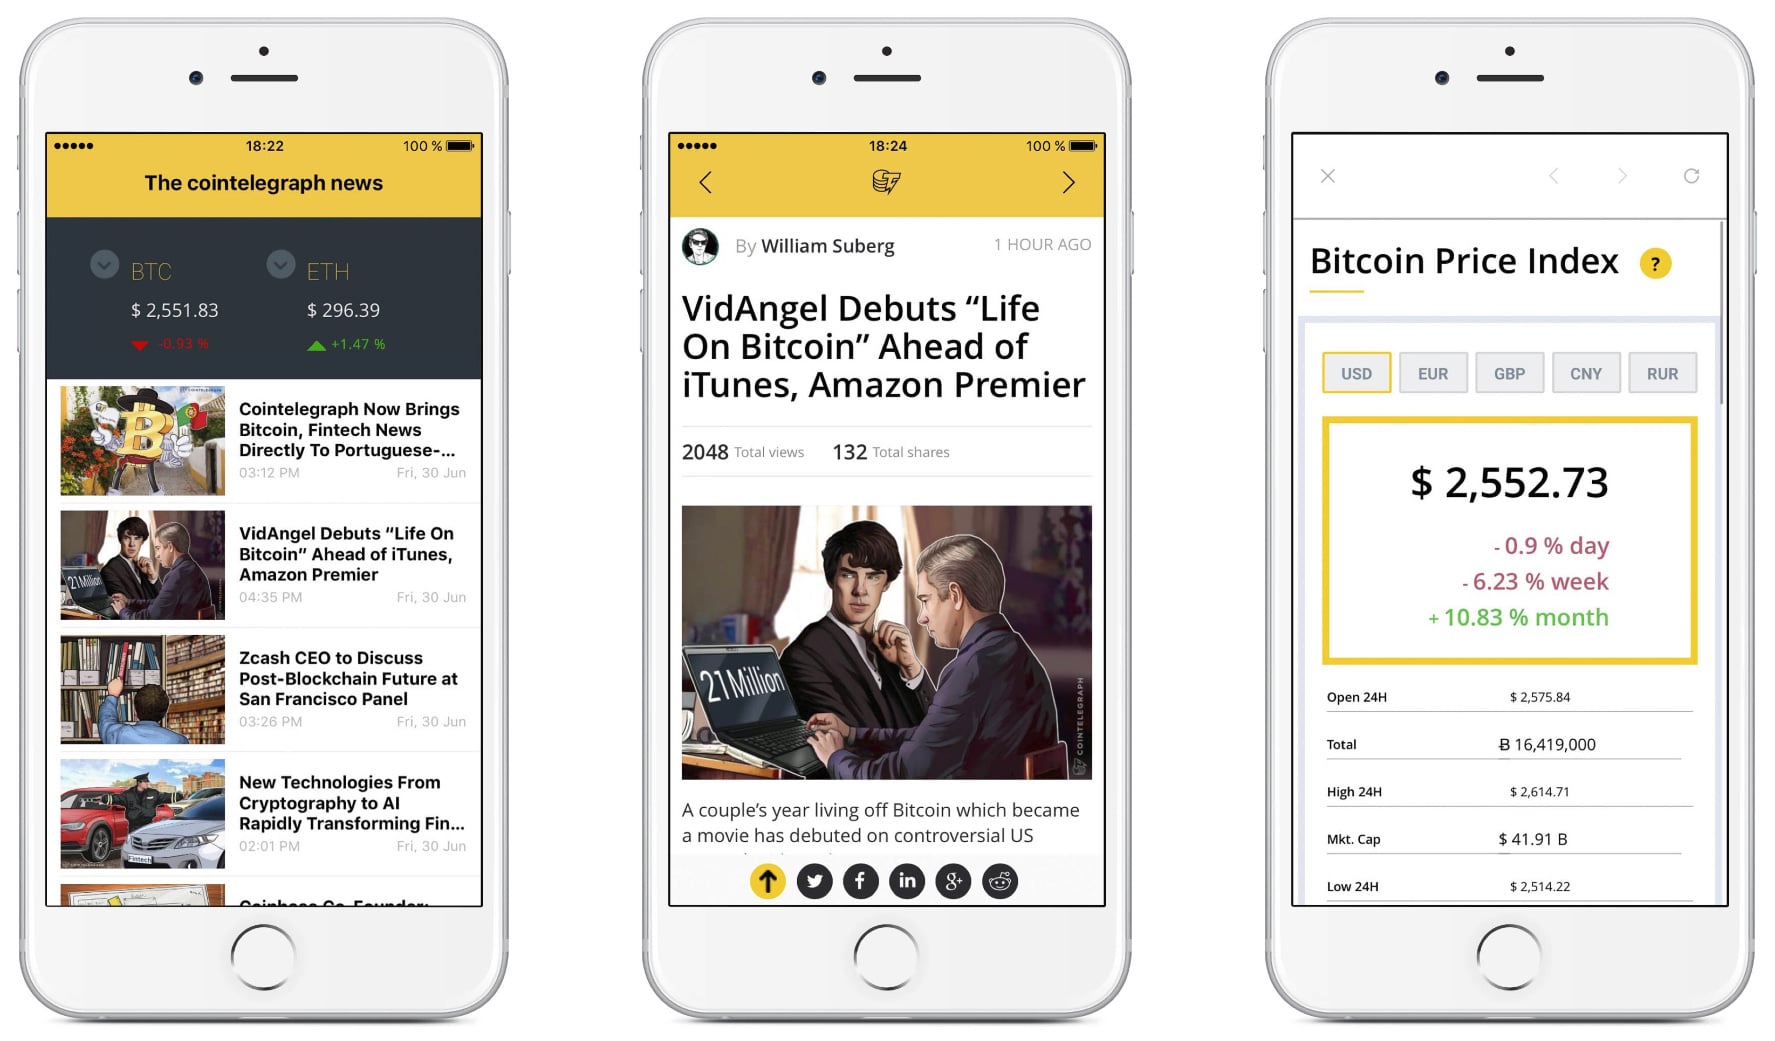 Three screencaps for the cryptocurrency app, CoinTelegraph. The first screen shows news, the second shows a specific news article, and the third shows the bitcoin price index.